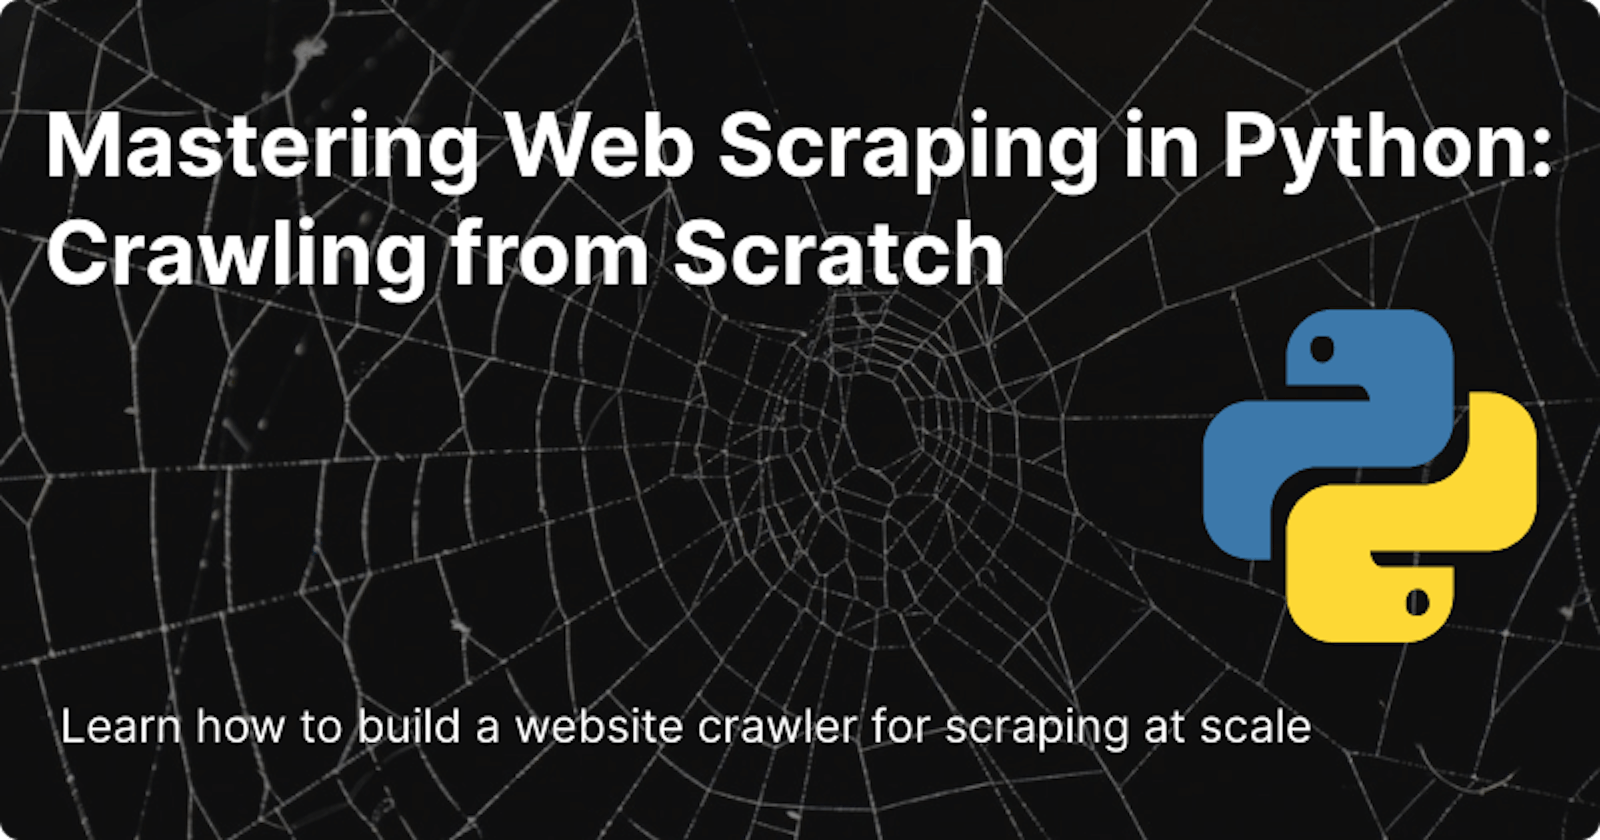 Mastering Web Scraping in Python: Crawling from Scratch